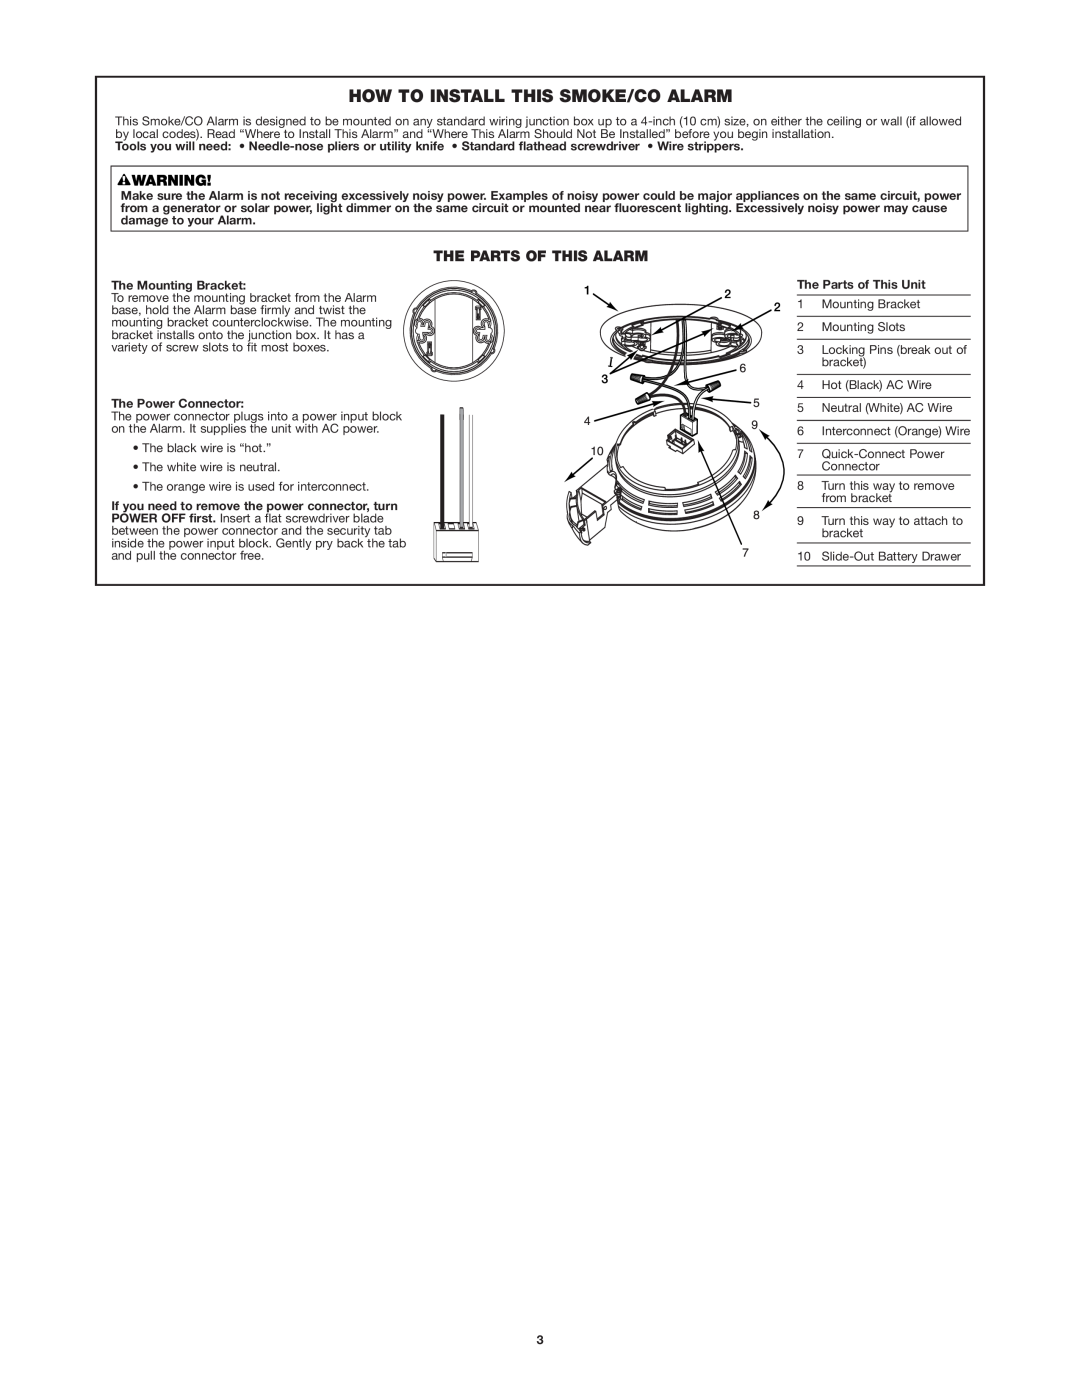 First Alert SC7010B user manual How To Install This Smoke/Co Alarm, The Parts Of This Alarm 